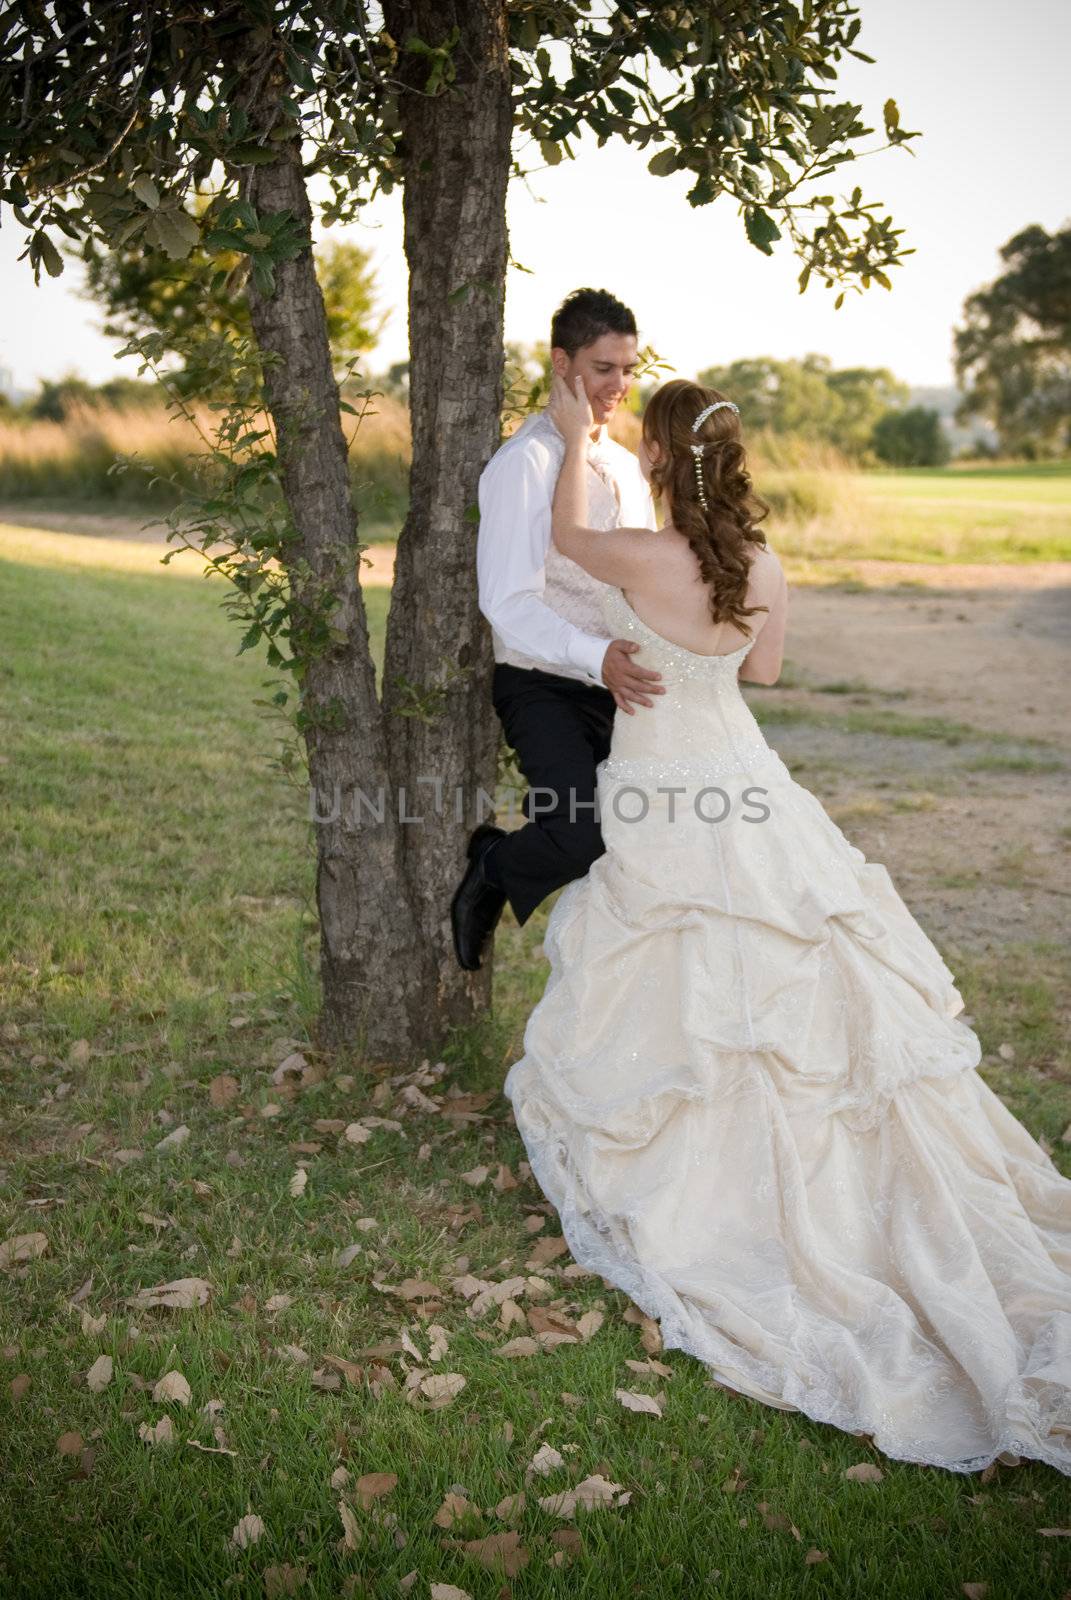 just married couple standing and kissing against a tree in the shade on a sunny day